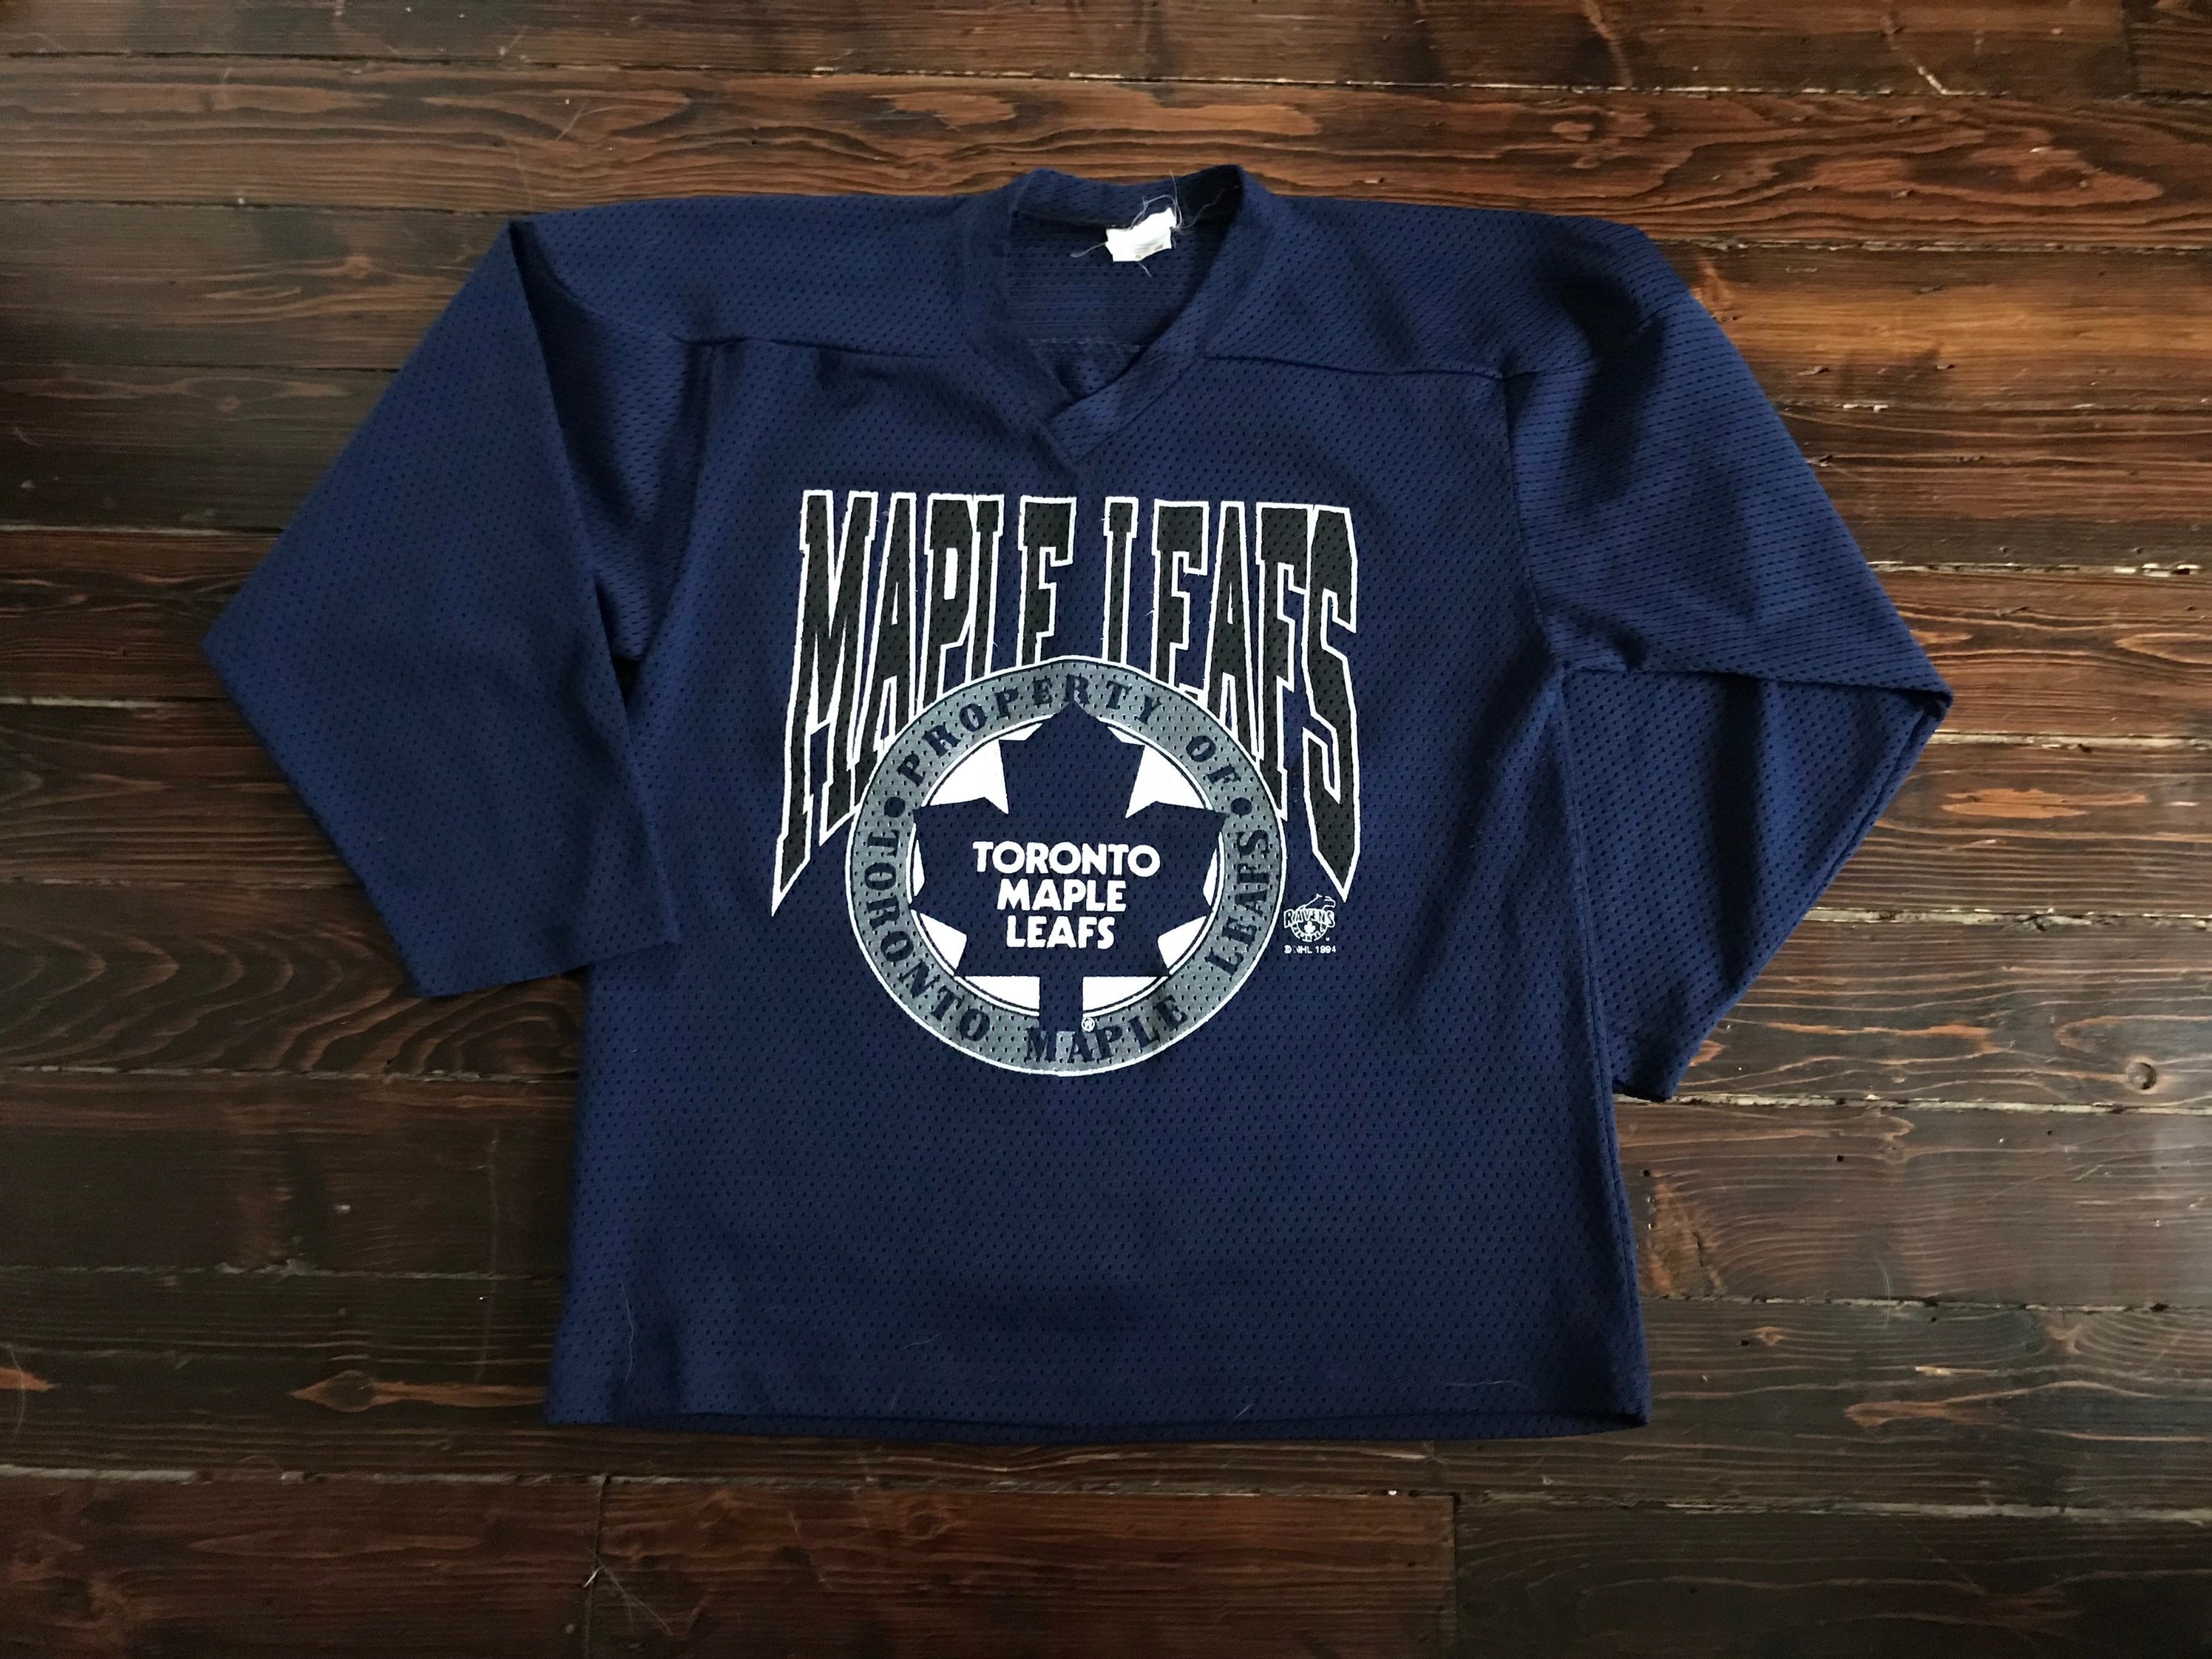 Blank Toronto Maples Leafs Reverse Retro Jersey - Athletic Knit